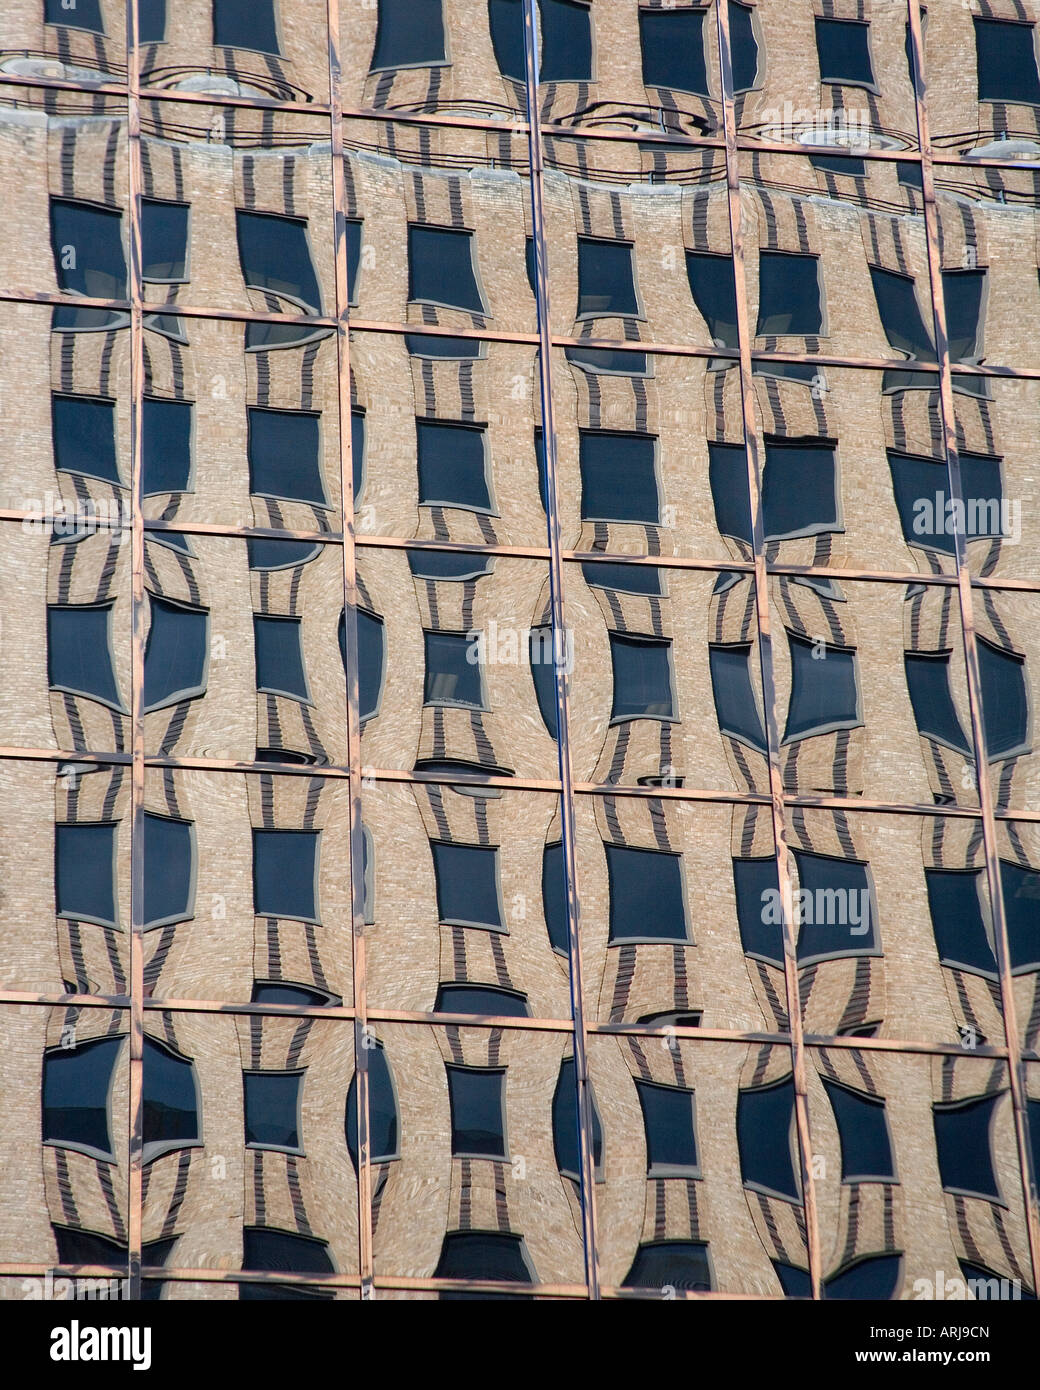 Classic brick office building reflected in a mirrored wall Stock Photo